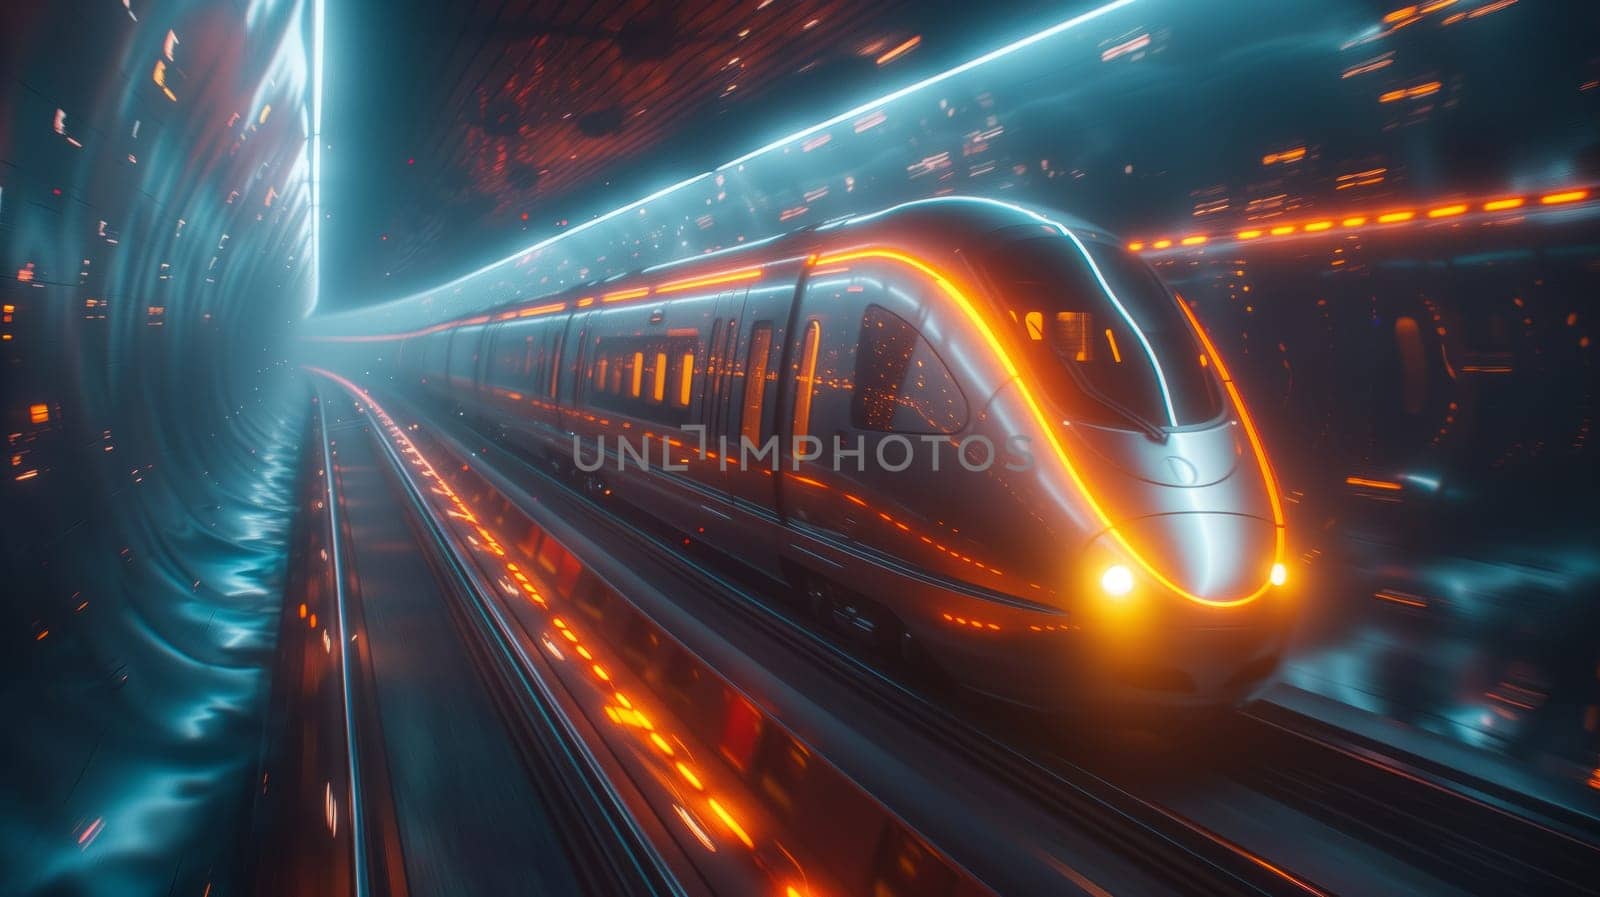 An electric blue train with automotive lighting illuminates the tunnel as it speeds through the night, creating a futuristic atmosphere